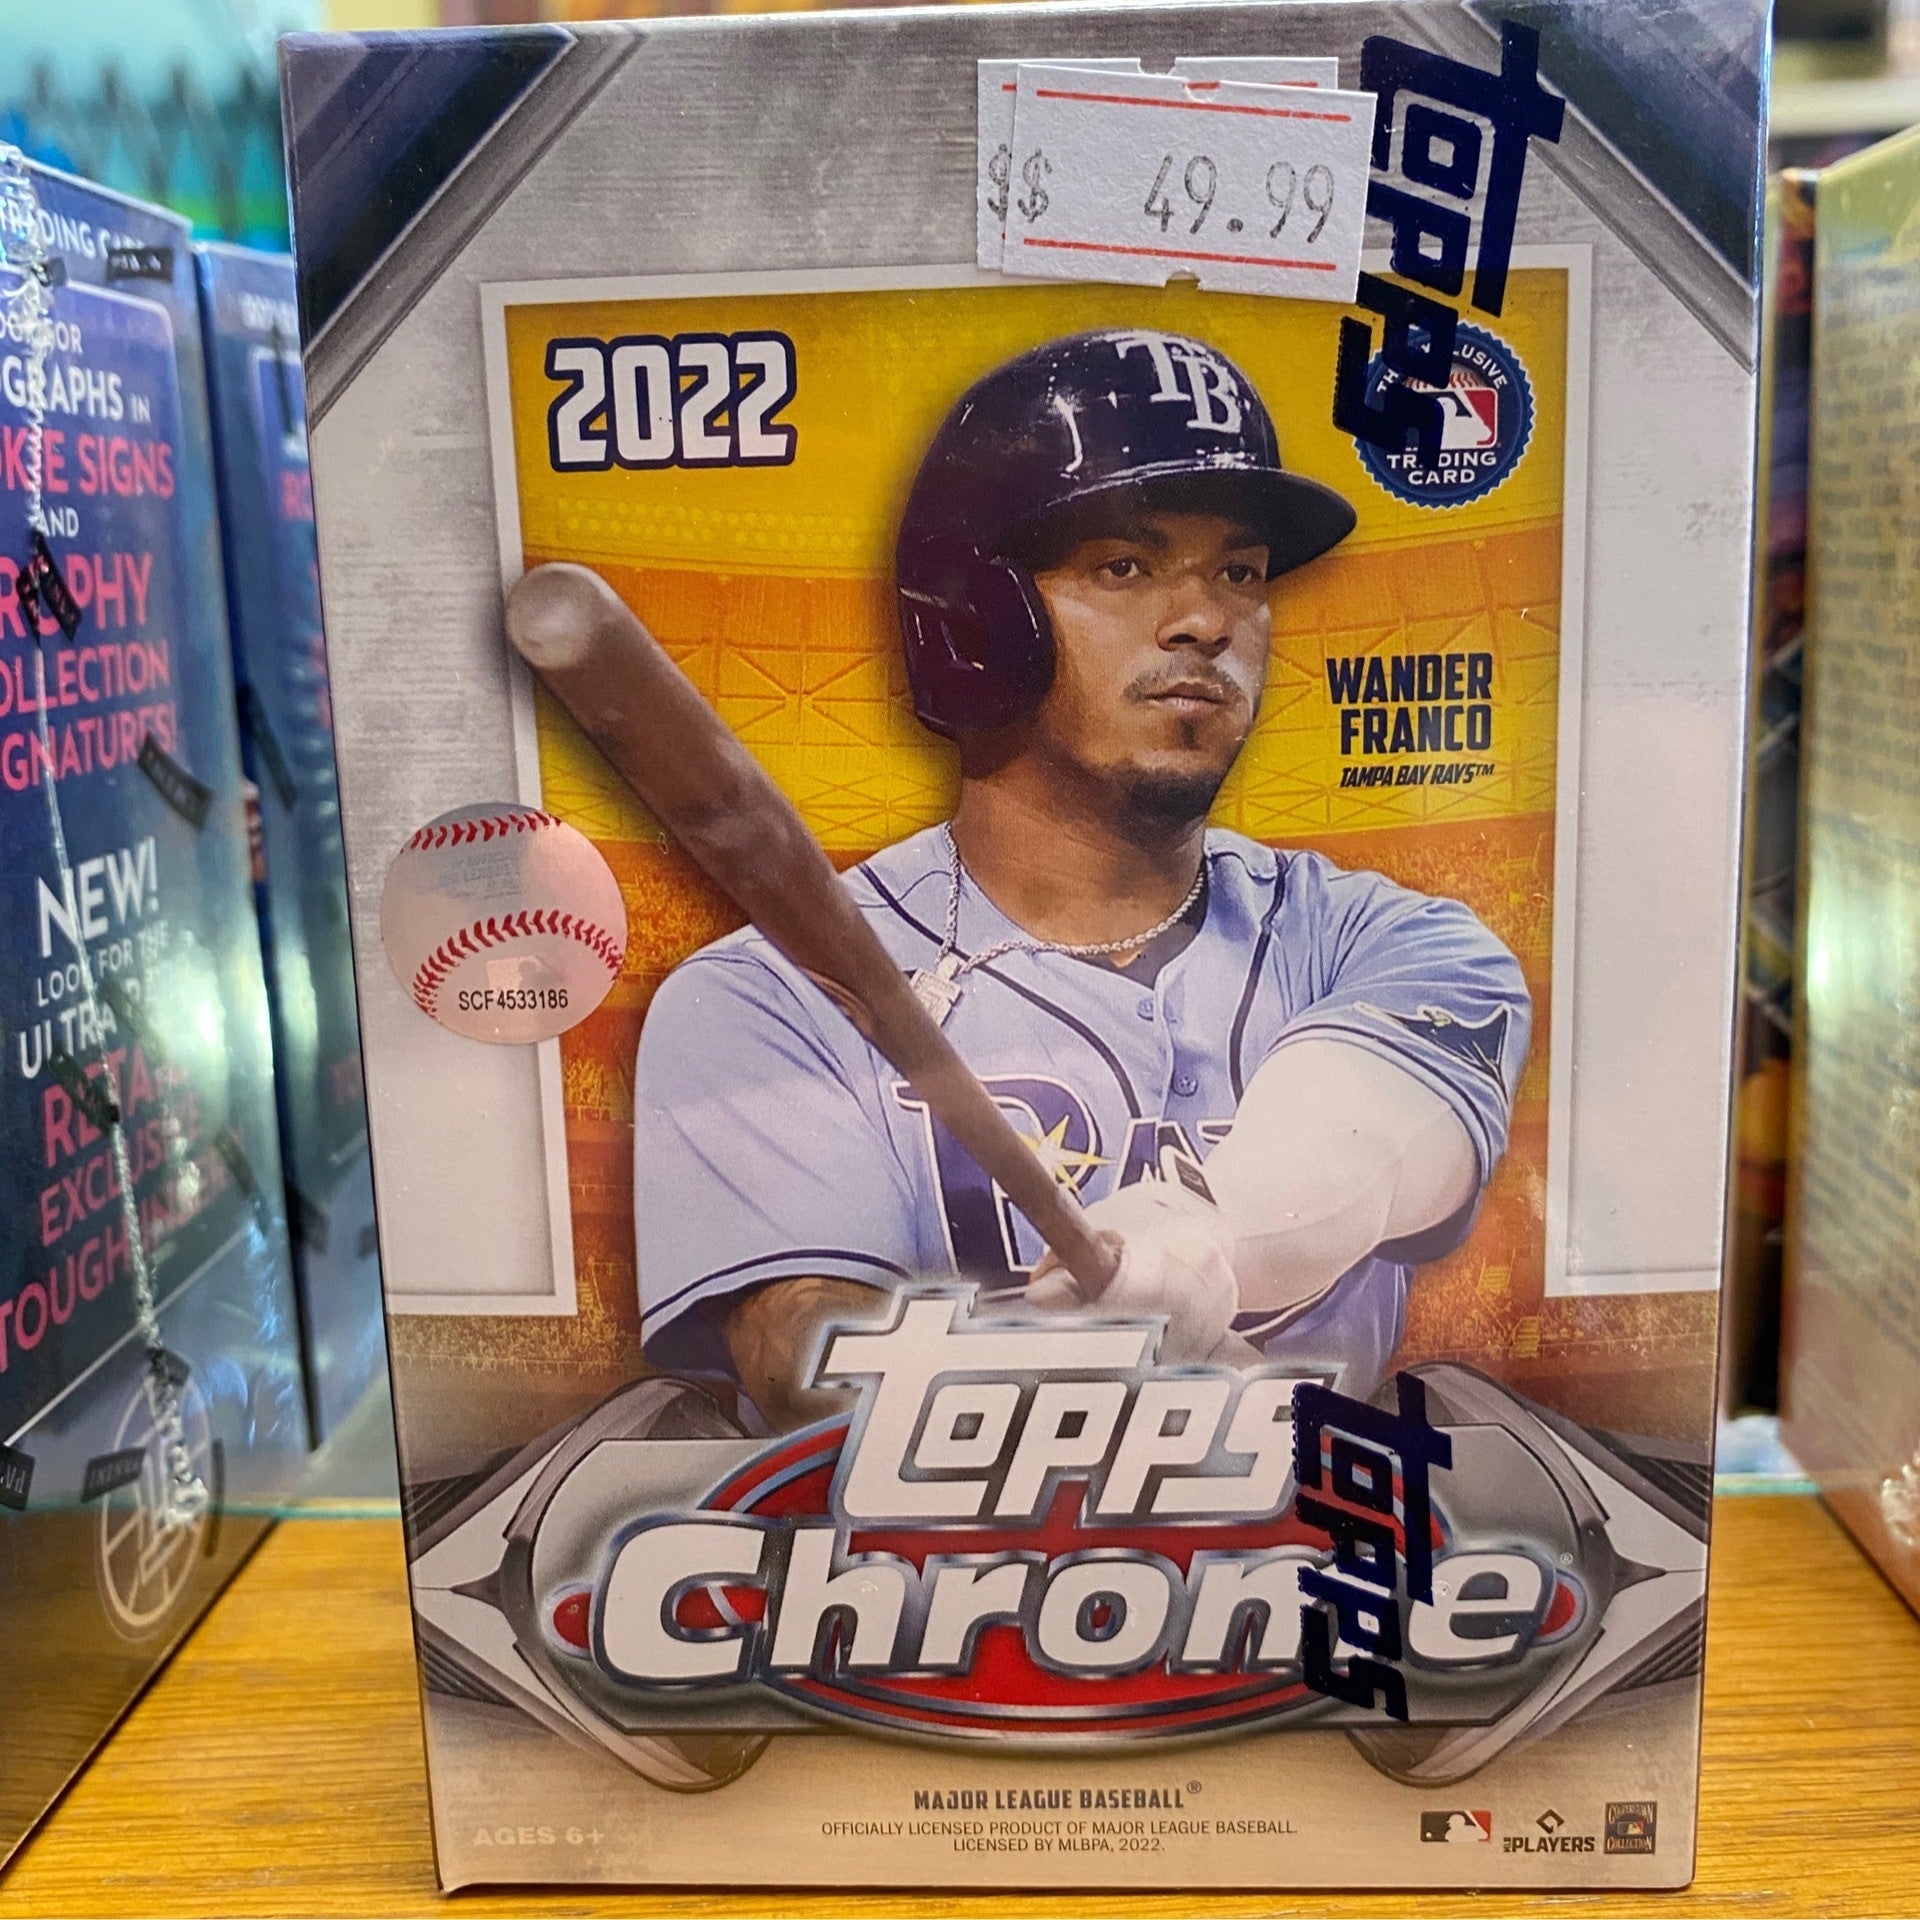 2021 Topps Chrome Baseball Cards Blaster Box 32 Cards. Includes 2 Sepia and  2 Pink Refractors